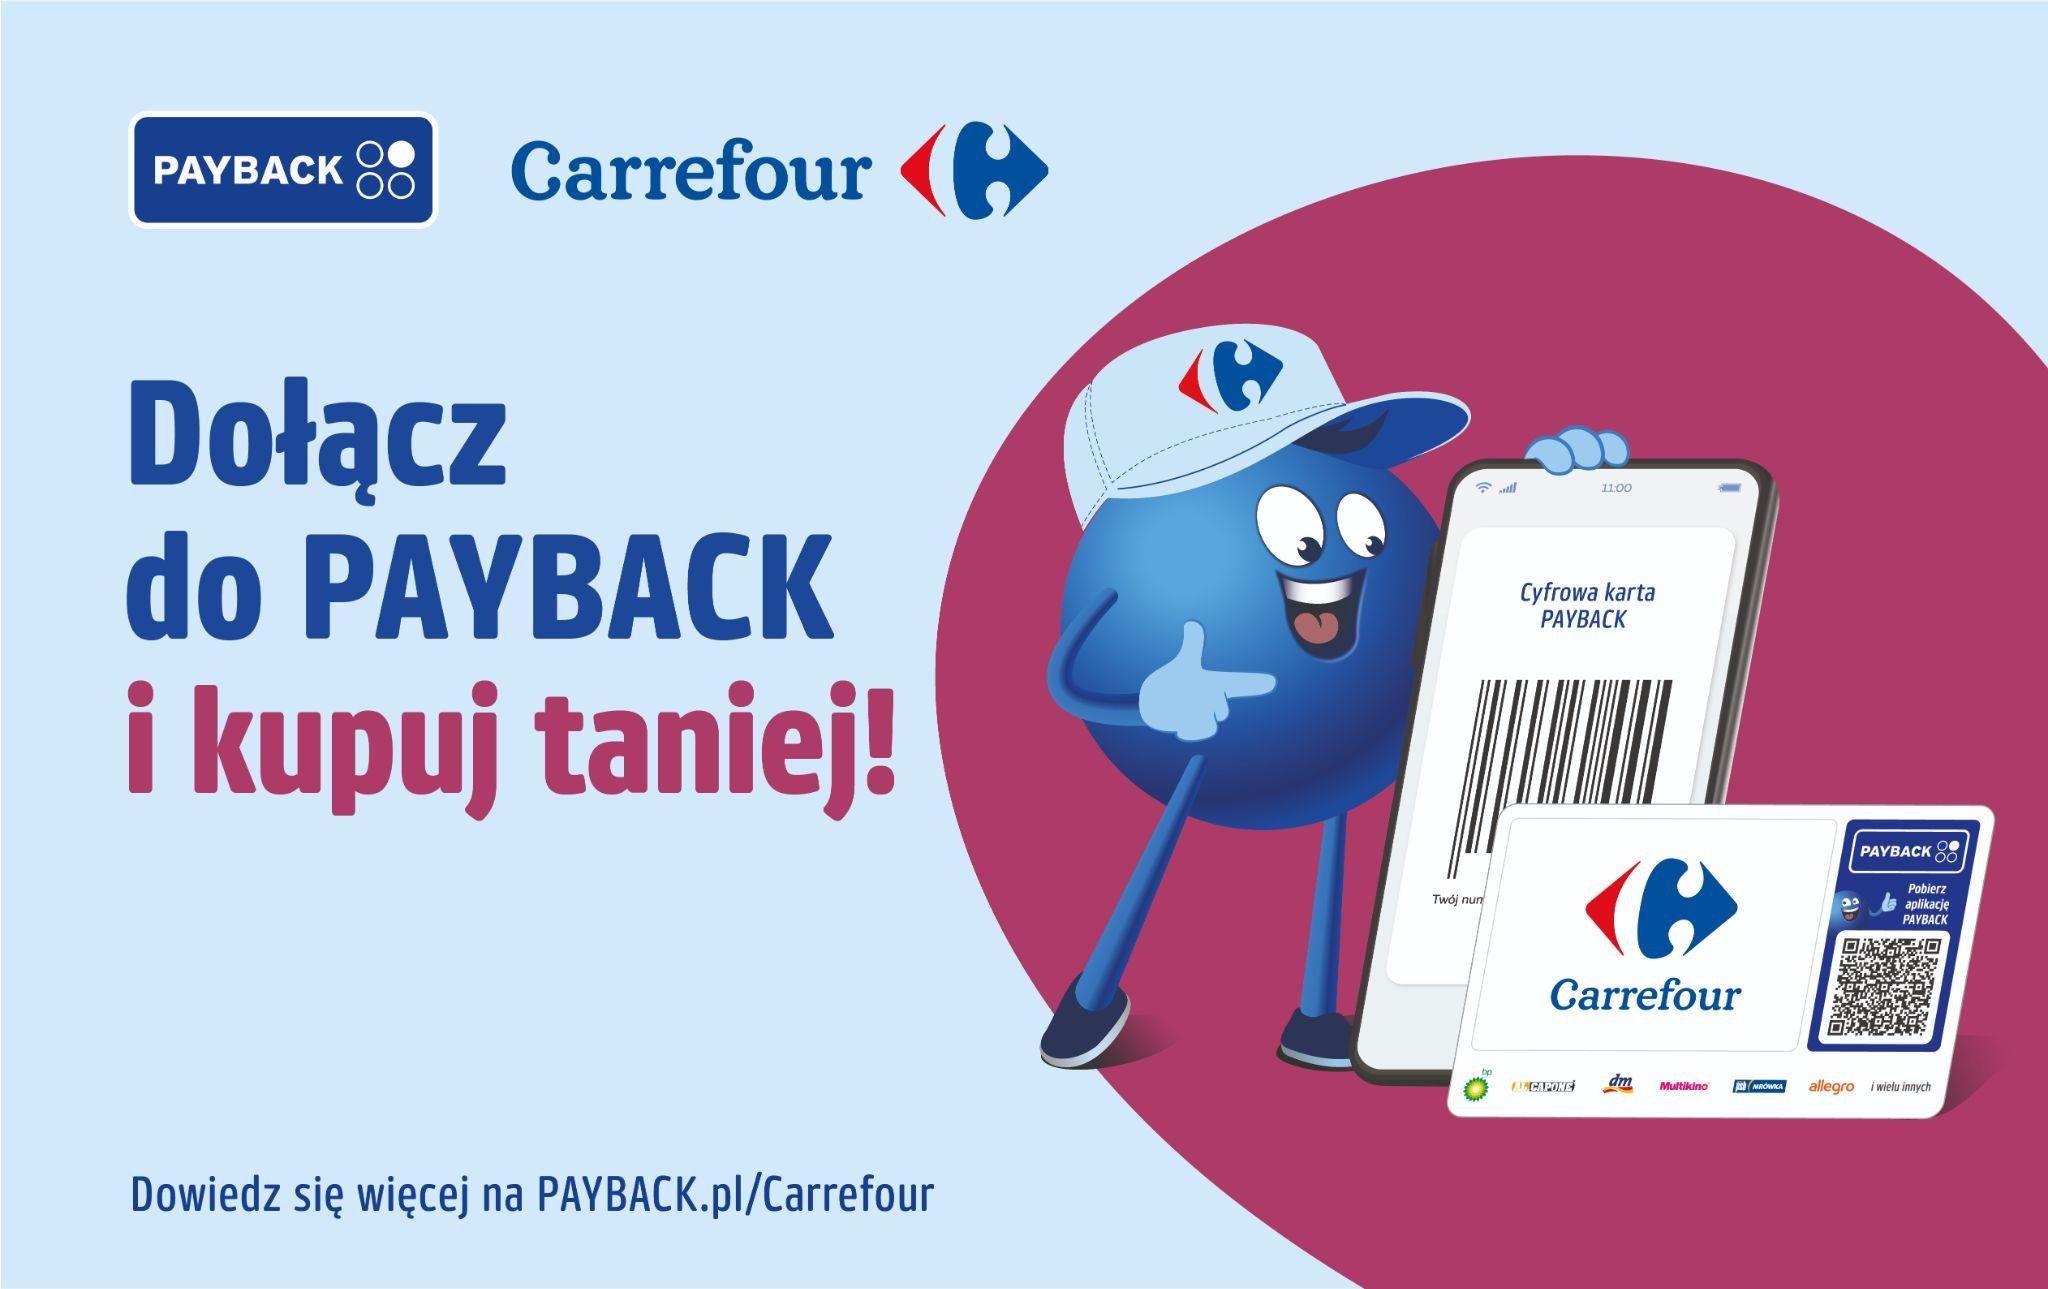 Collect points and buy cheaper at Carrefour! We join PAYBACK program in Poland